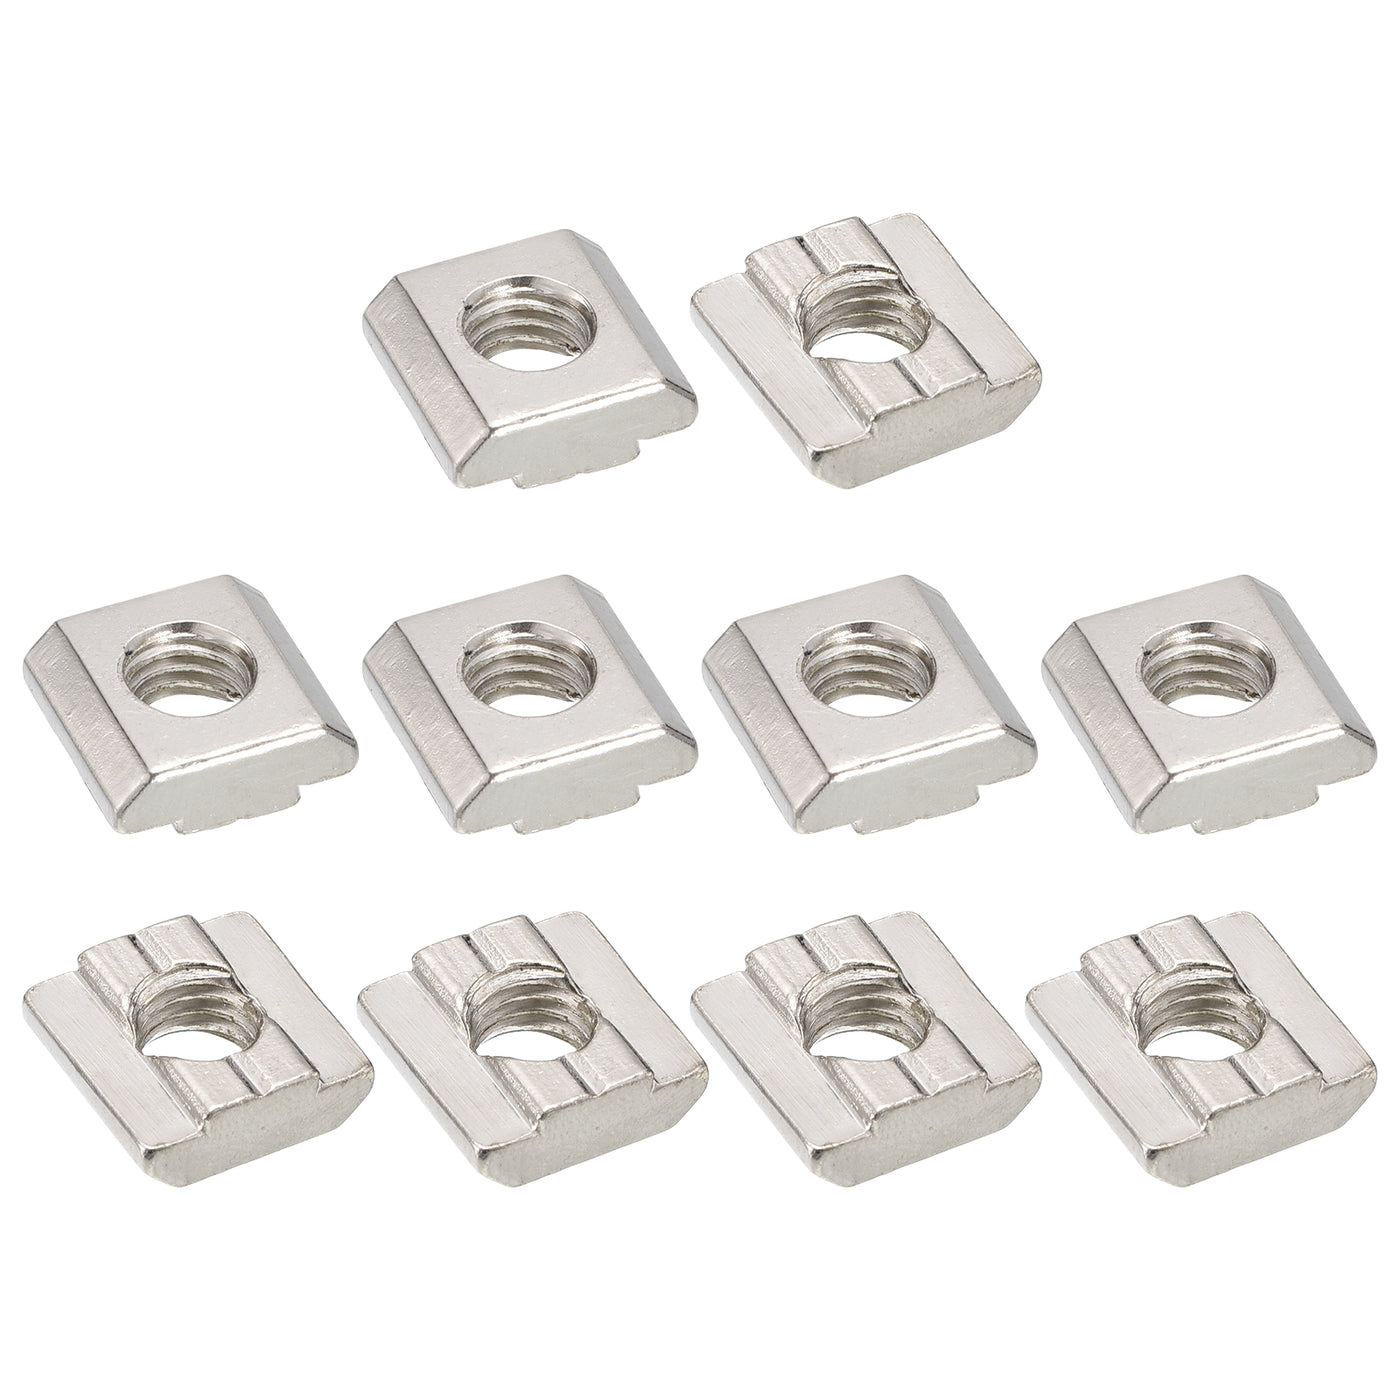 uxcell Uxcell T Nuts, 30pcs - Nickel Plated Carbon Steel T Slot Bolts, 3030 Series M8 Hammer Head Fastener, Sliding T Nuts for Aluminum Extrusion Profile (Silver)